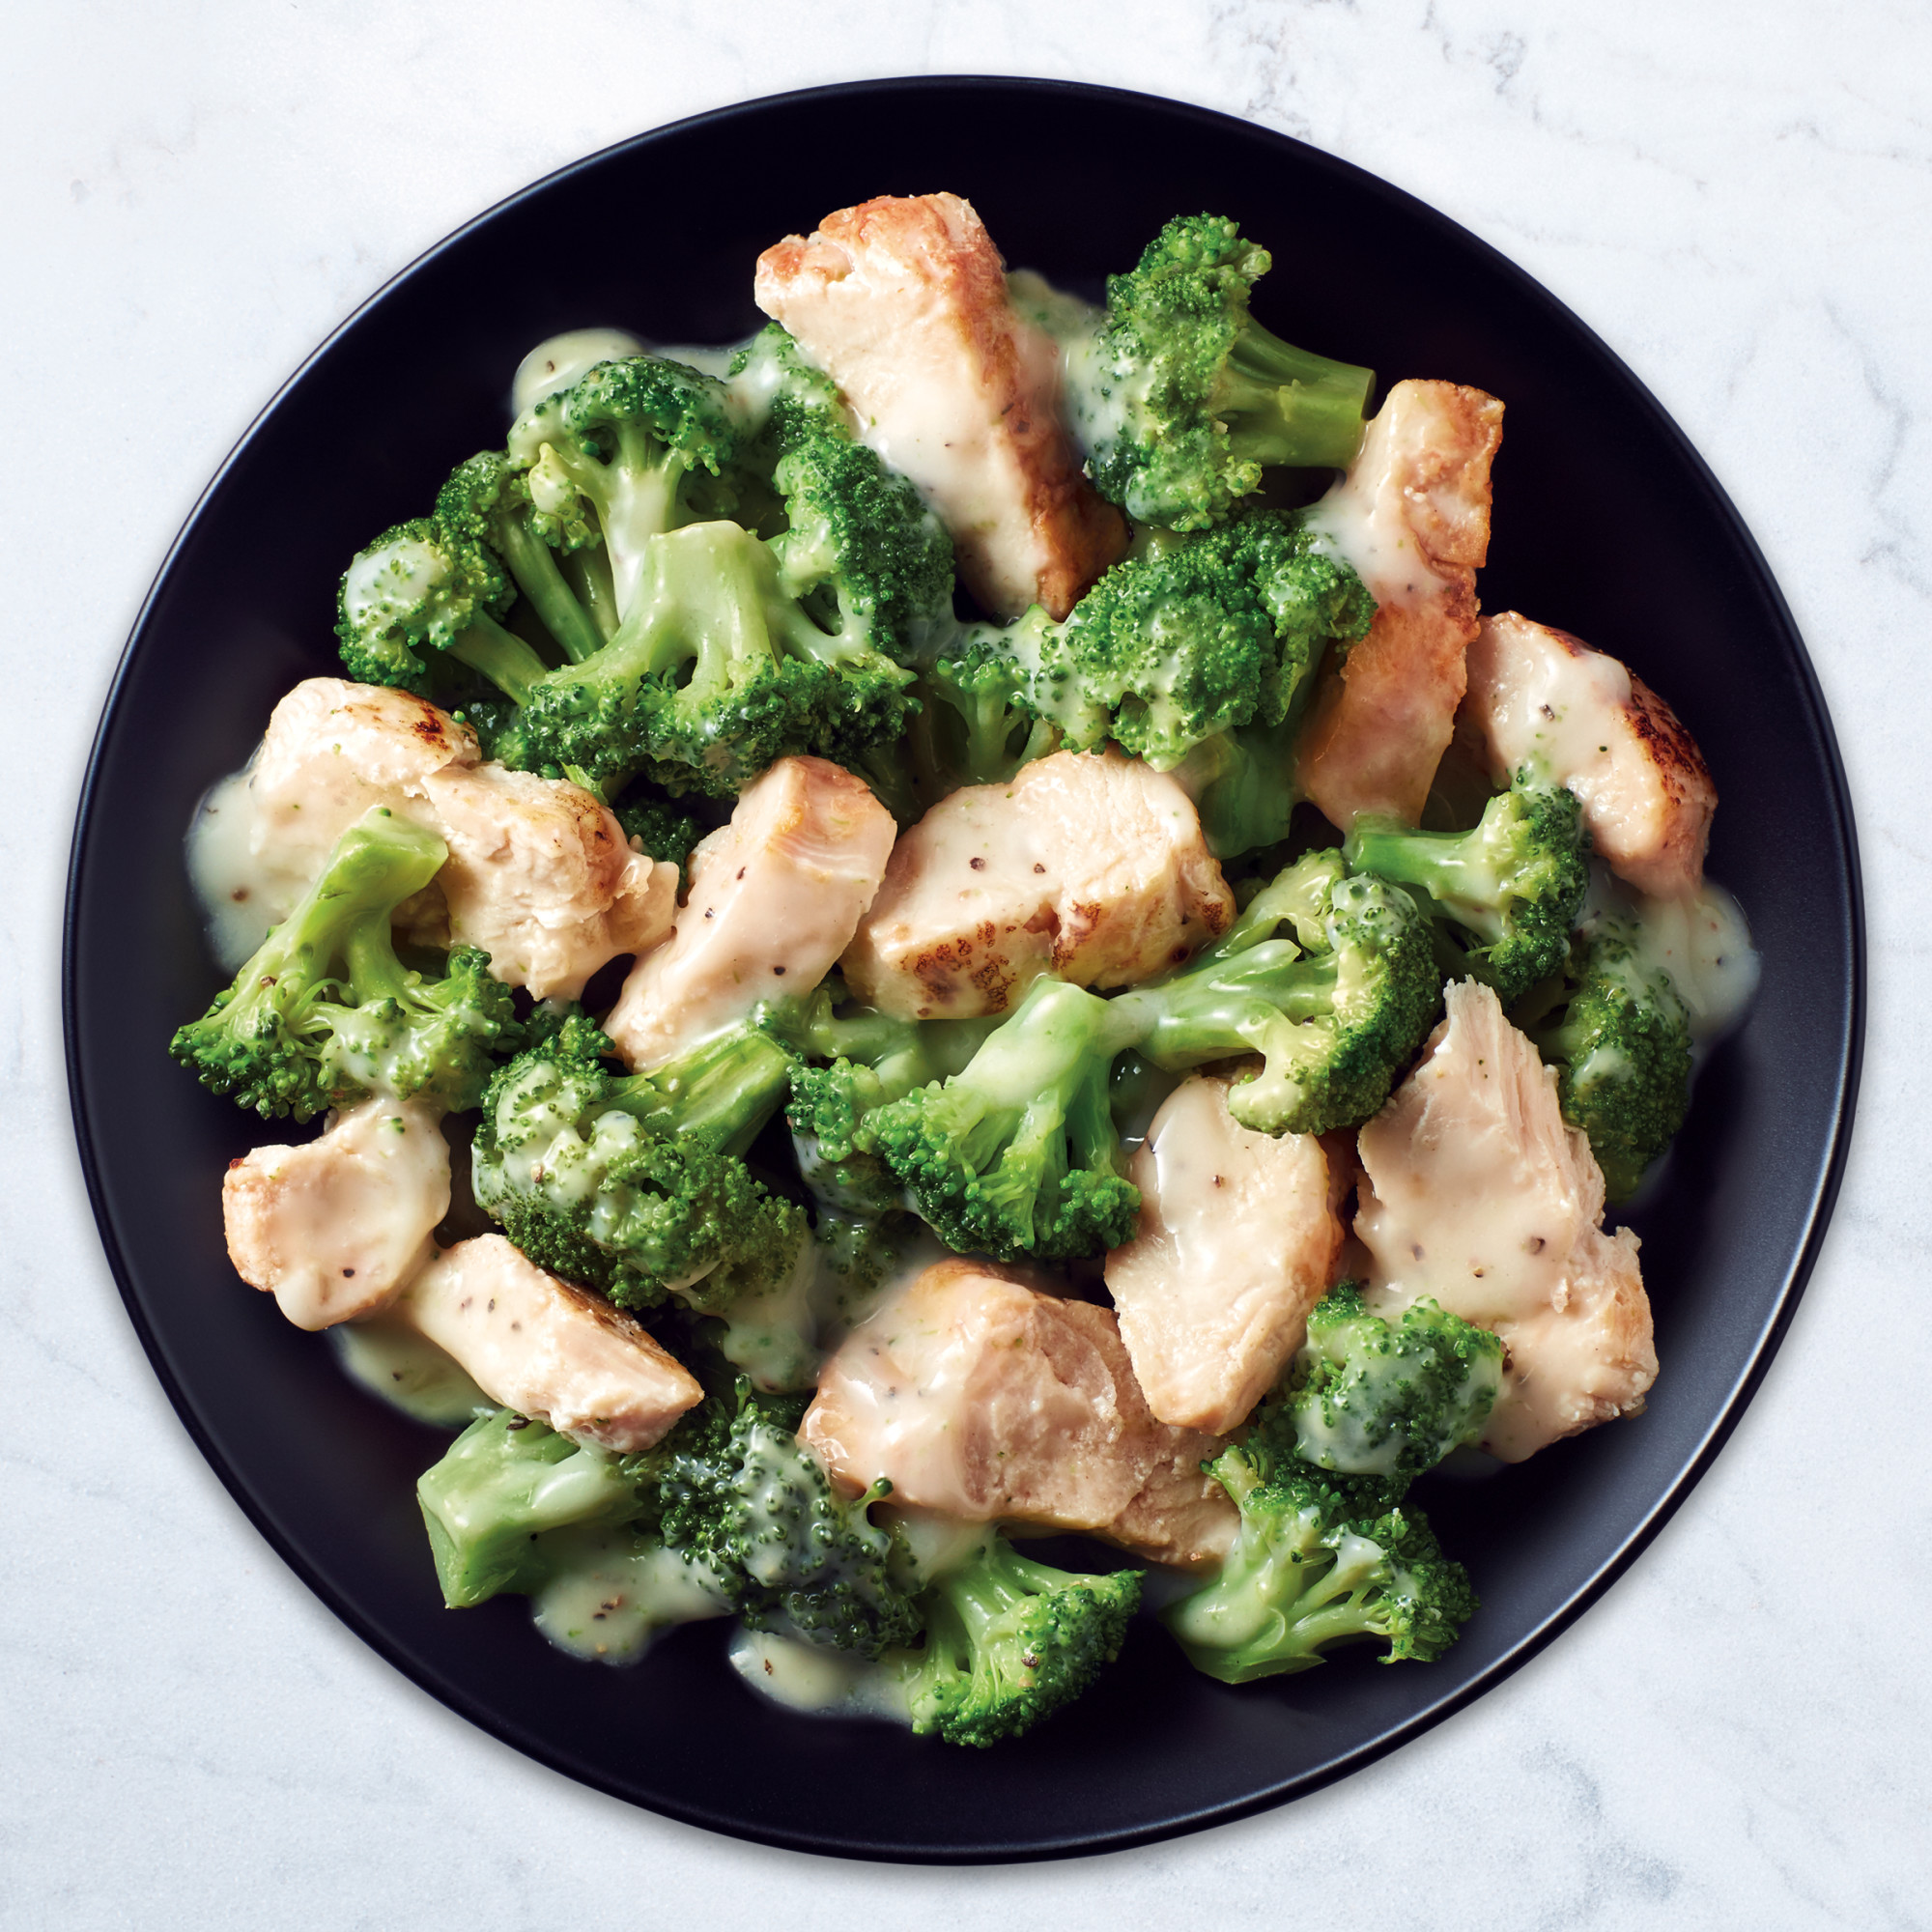 Healthy Choice Simply Steamers Grilled Chicken & Broccoli Alfredo, 9.15 oz (frozen) - image 5 of 8